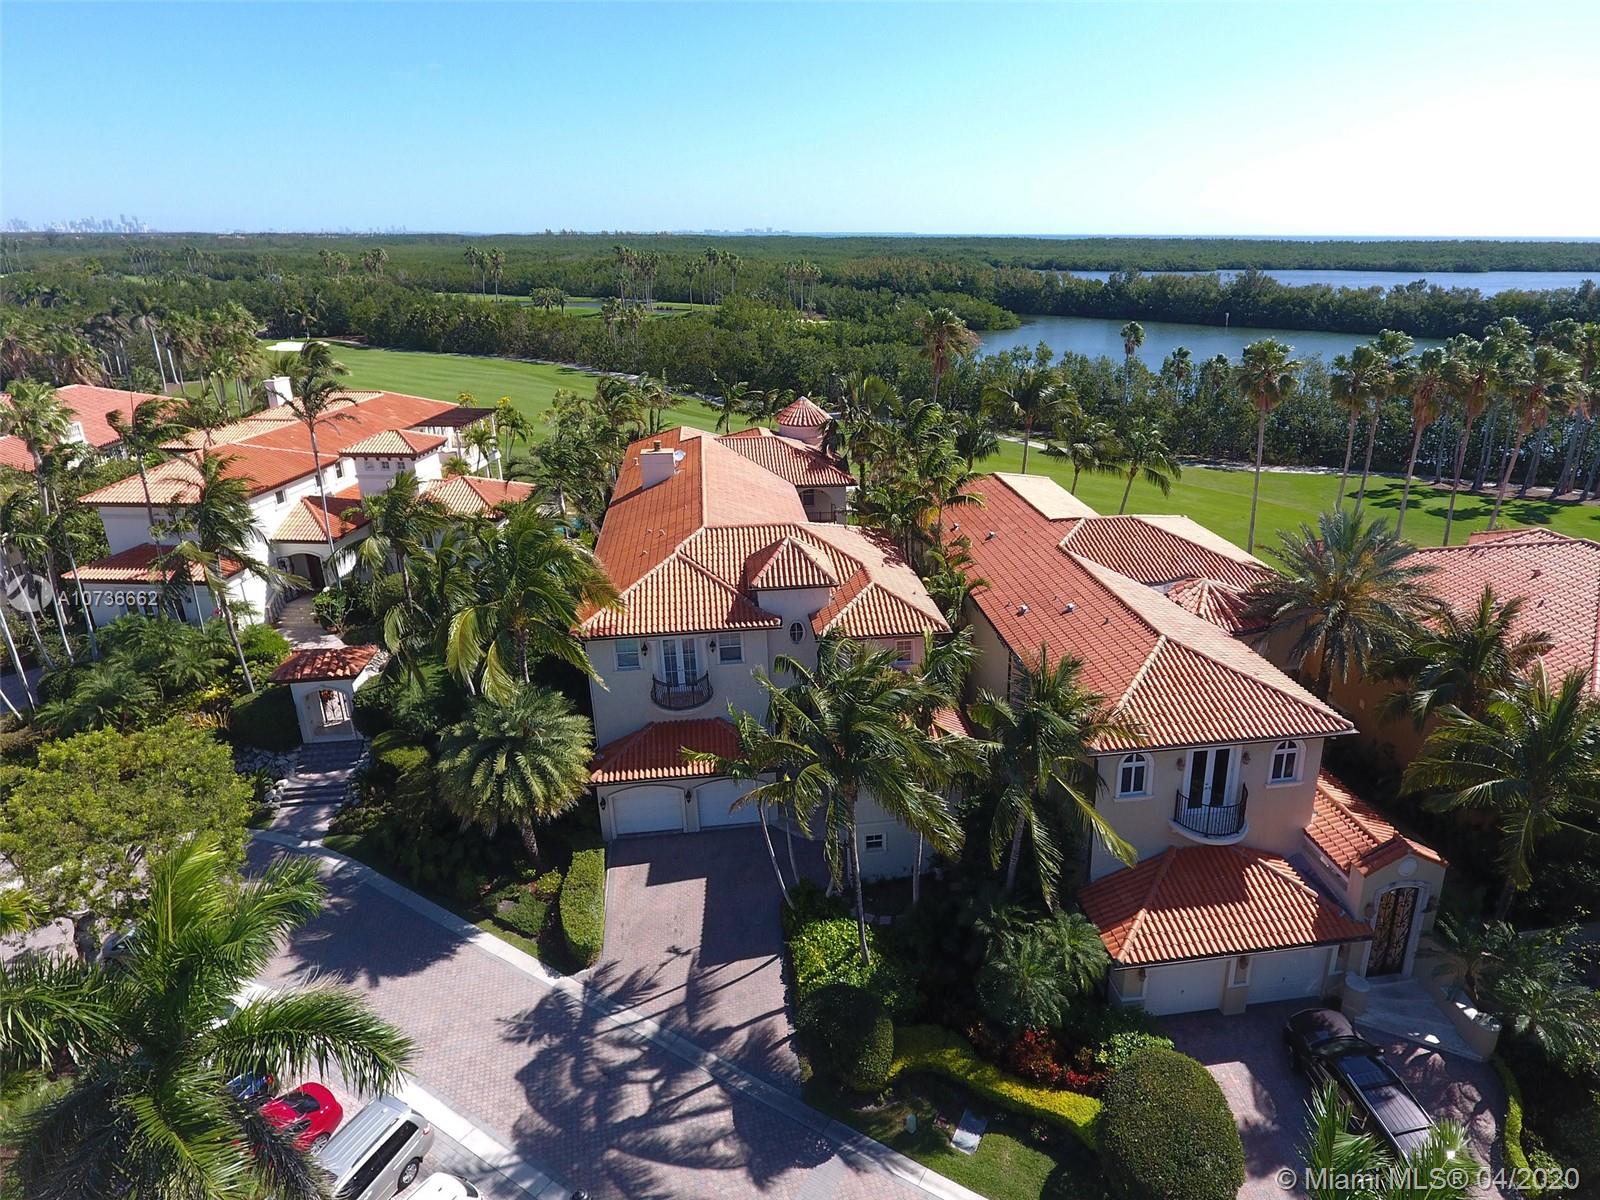 Stunning Deering Bay Estate Home located on the 4th hole of exclusive and private Arnold Palmer Golf Course.